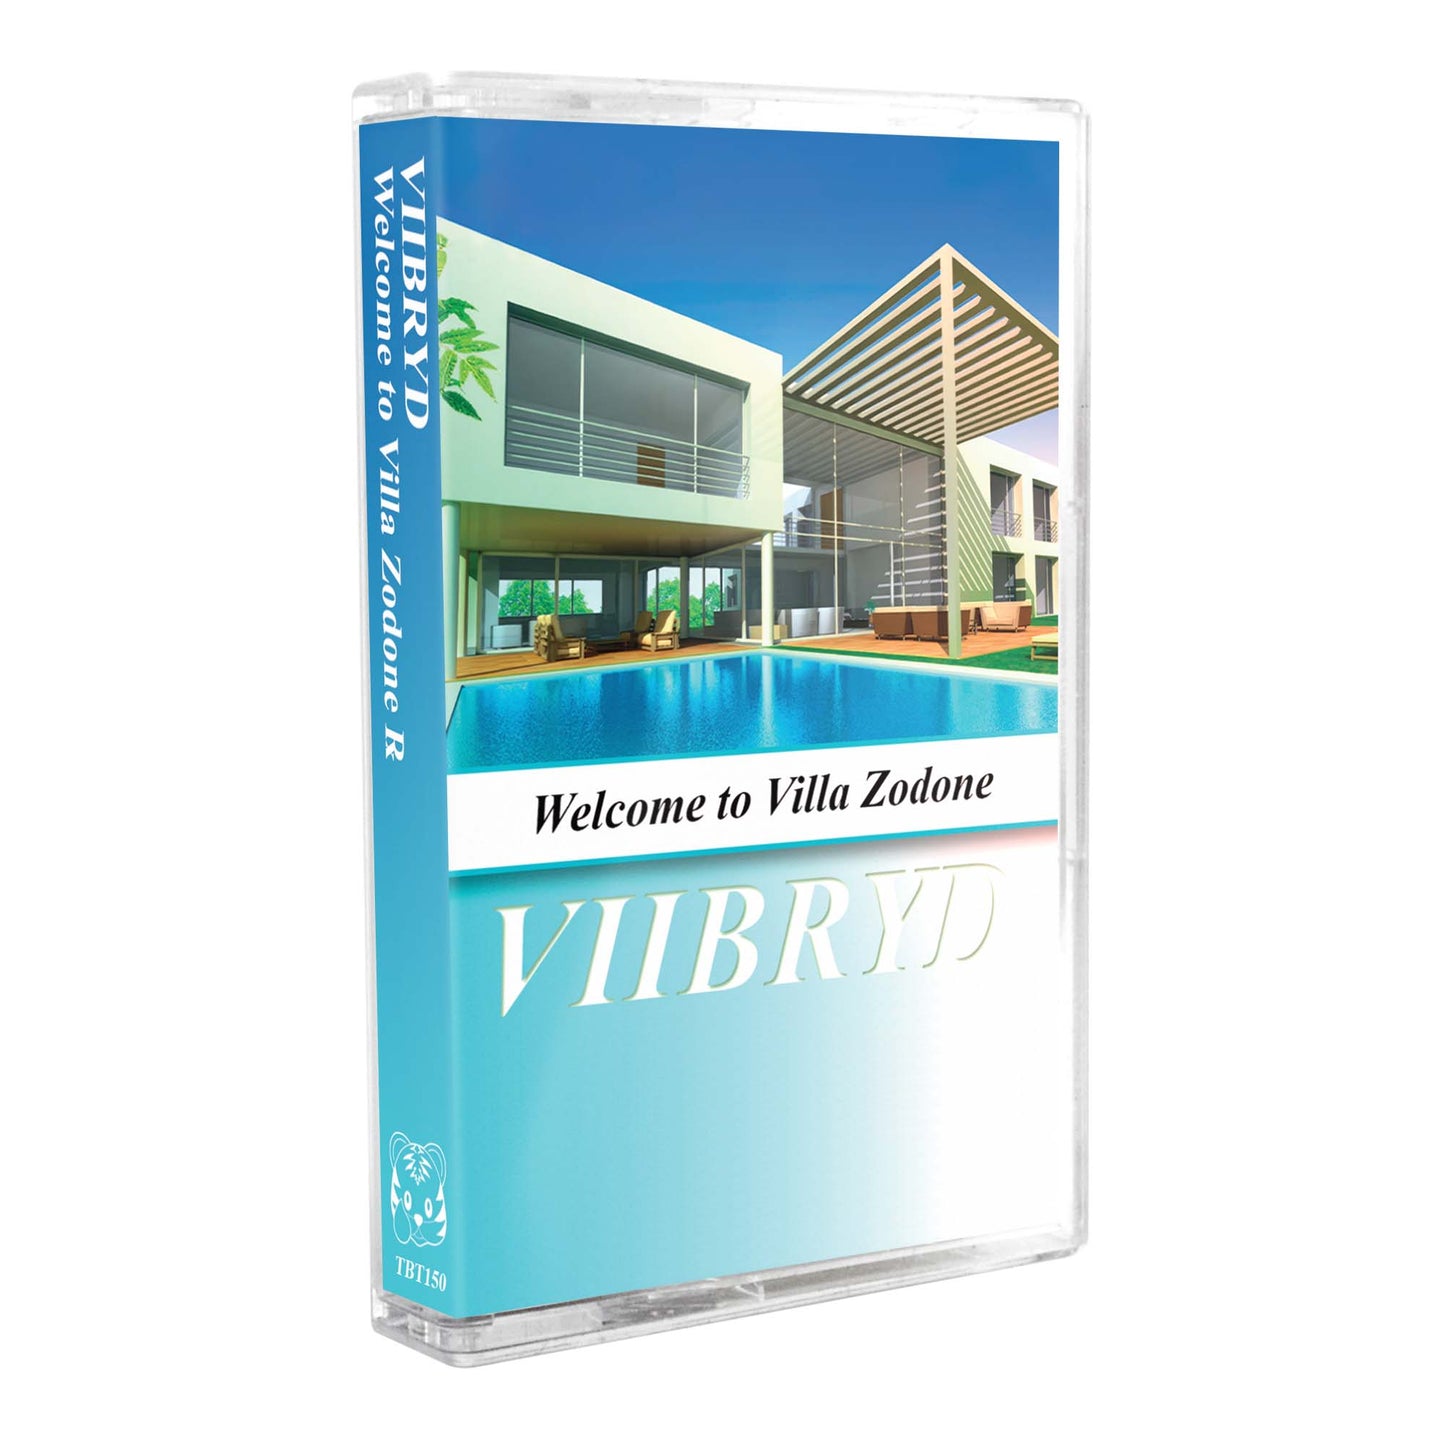 Viibryd - "Welcome to Villa Zodone ℞" Limited Edition Cassette Tape